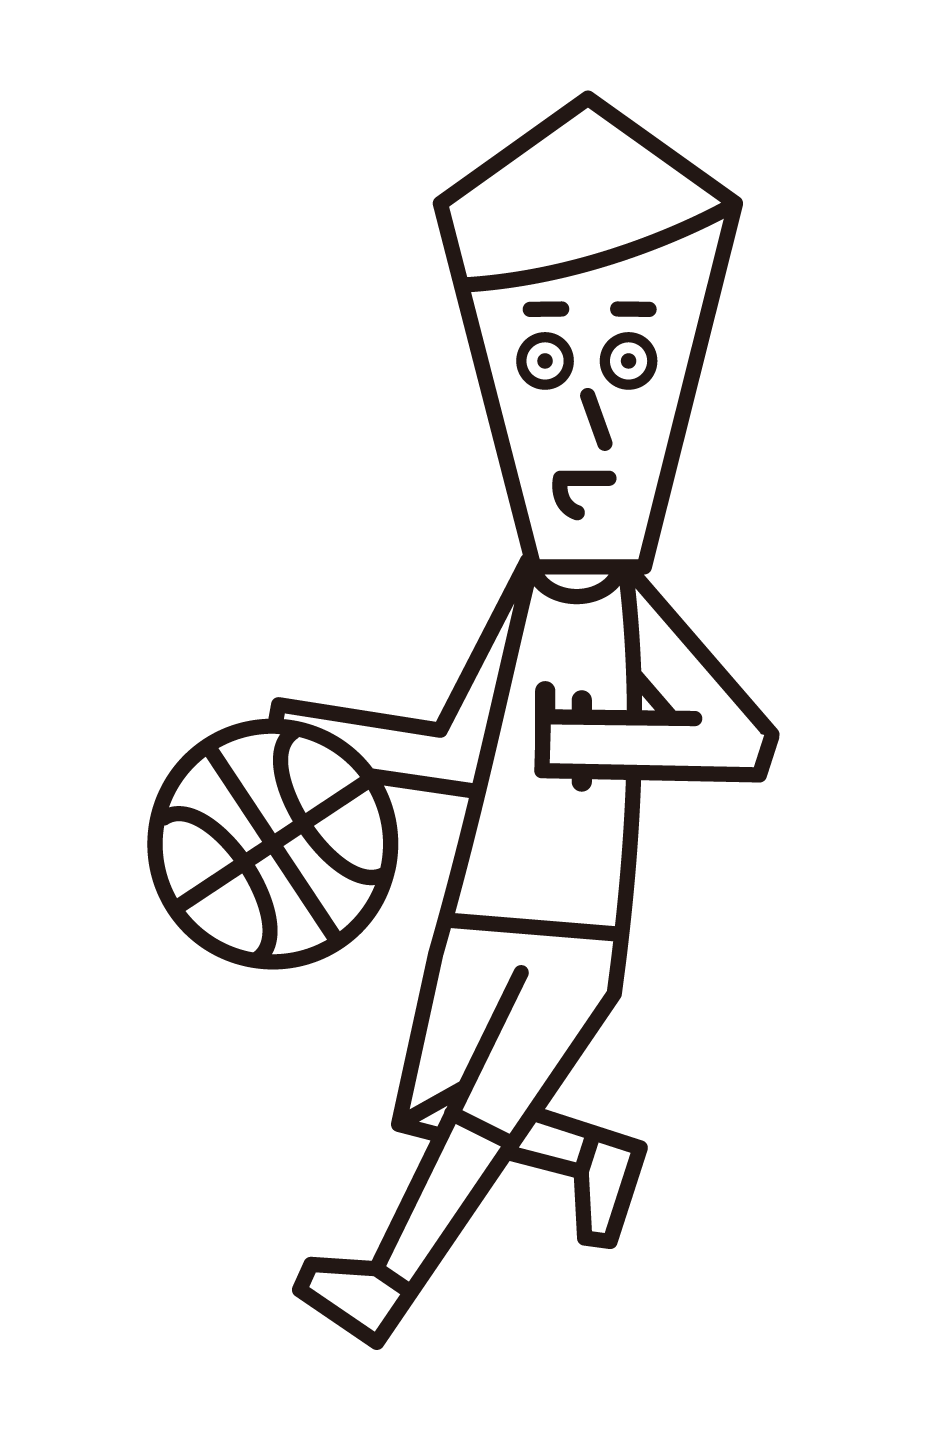 Illustration of a male basketball player dribbling